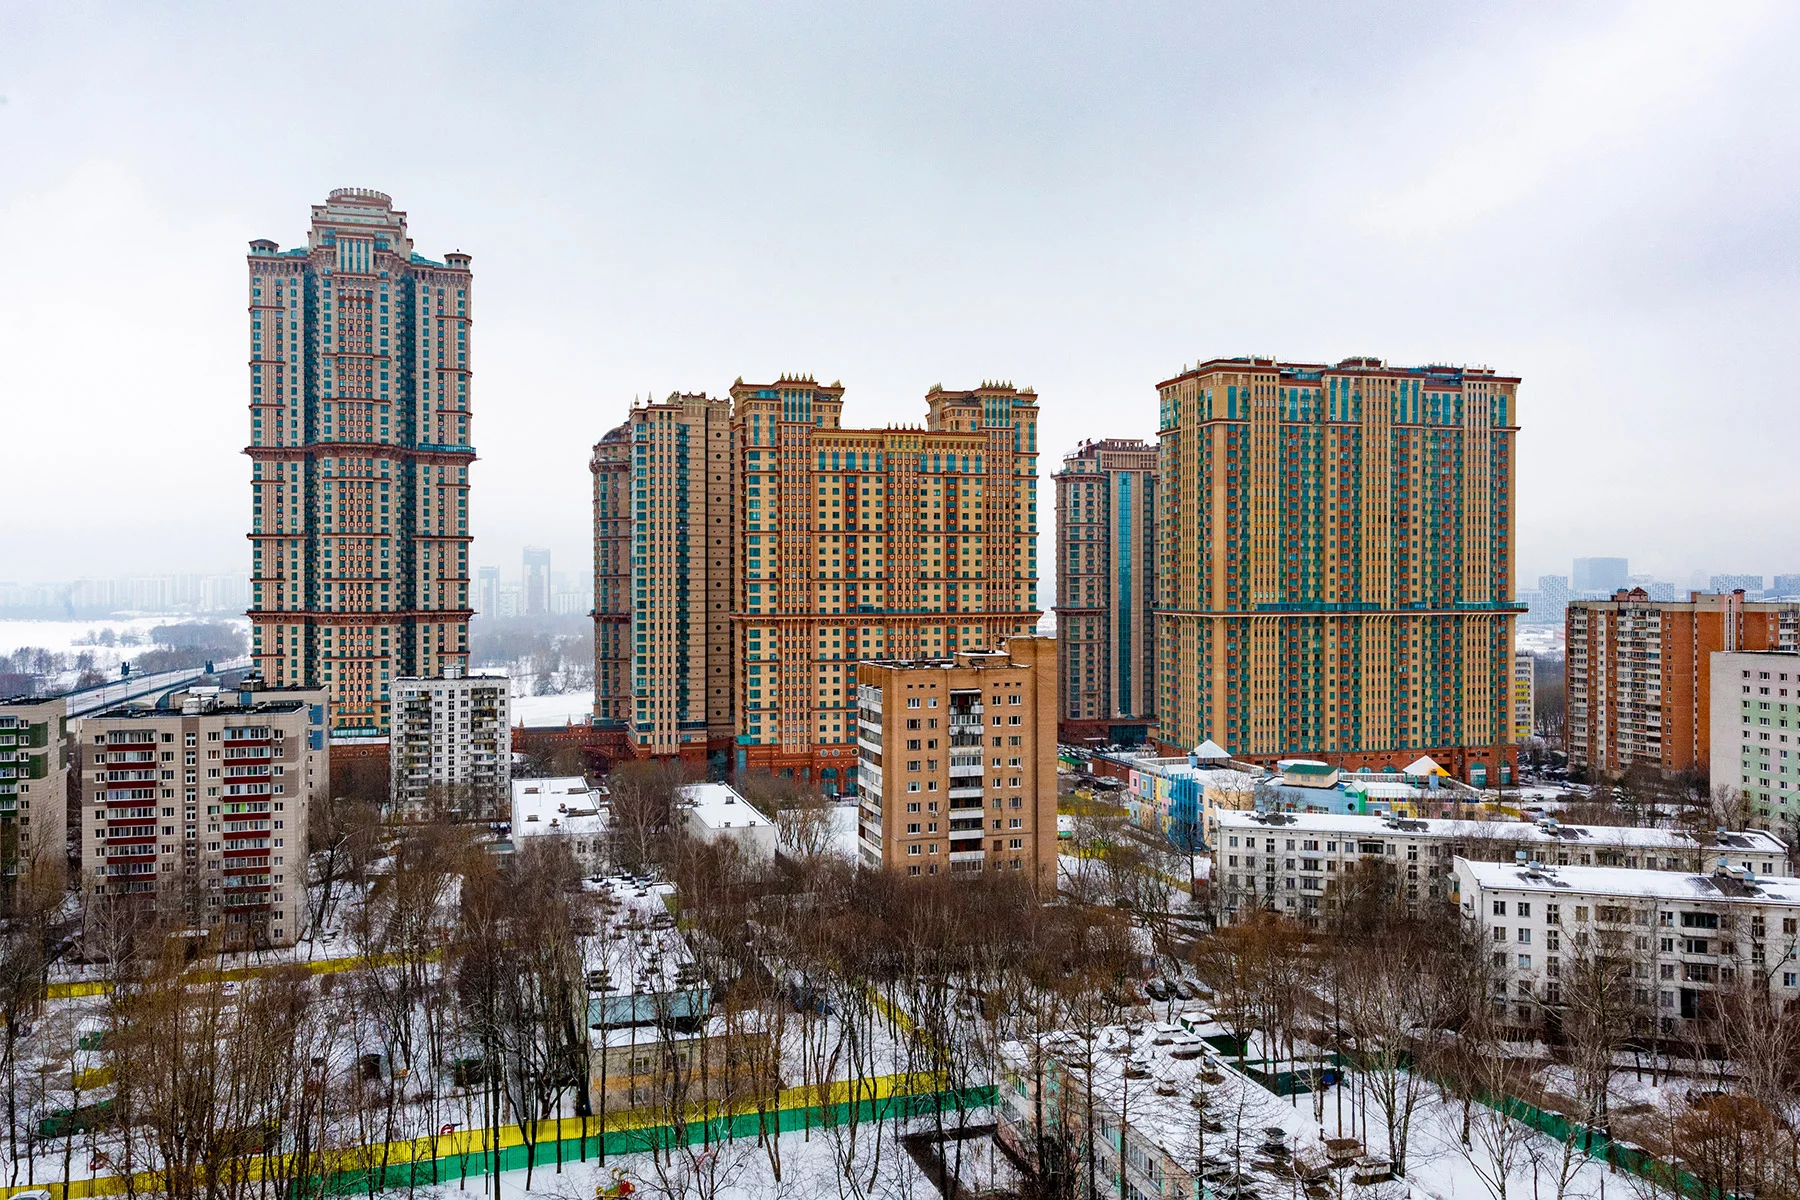 Large residential tower blocks in Moscow.